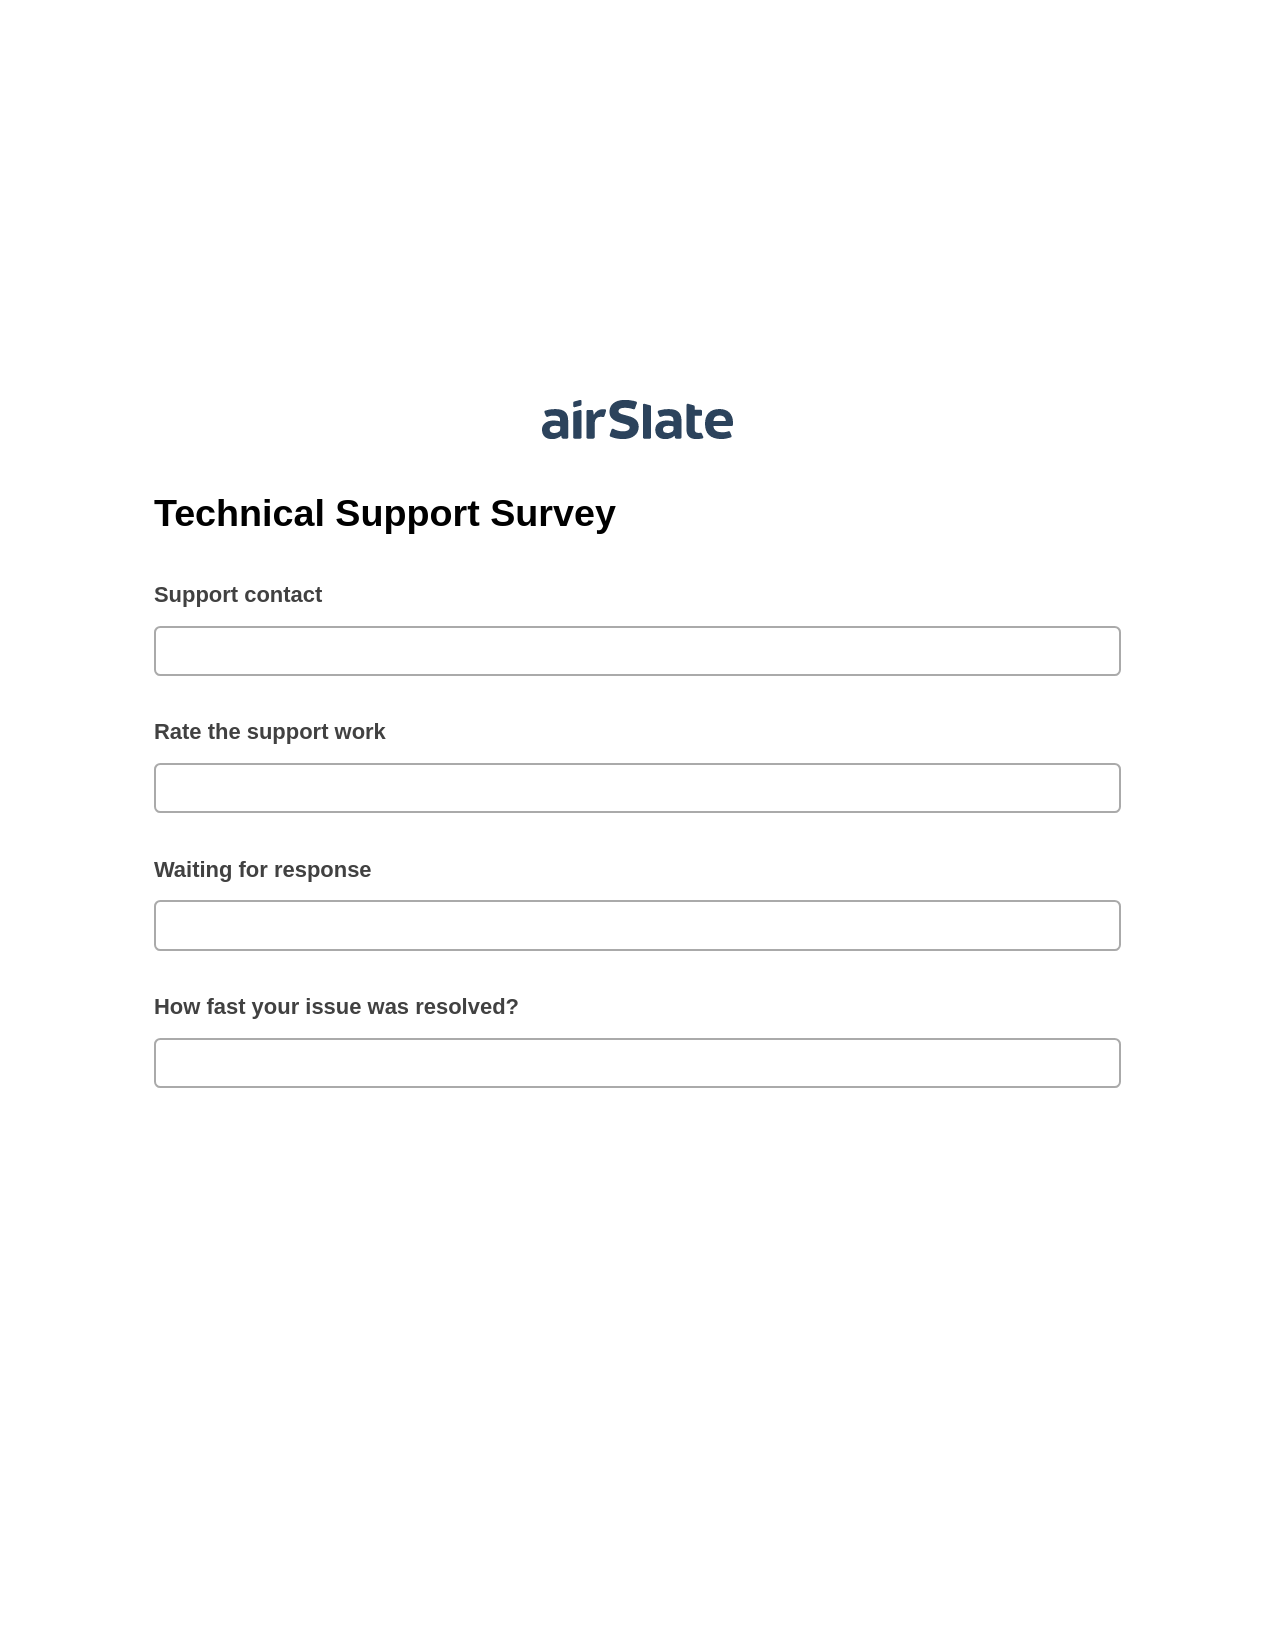 Multirole Technical Support Survey Pre-fill from Excel Spreadsheet Bot, Remove Tags From Slate Bot, Export to WebMerge Bot